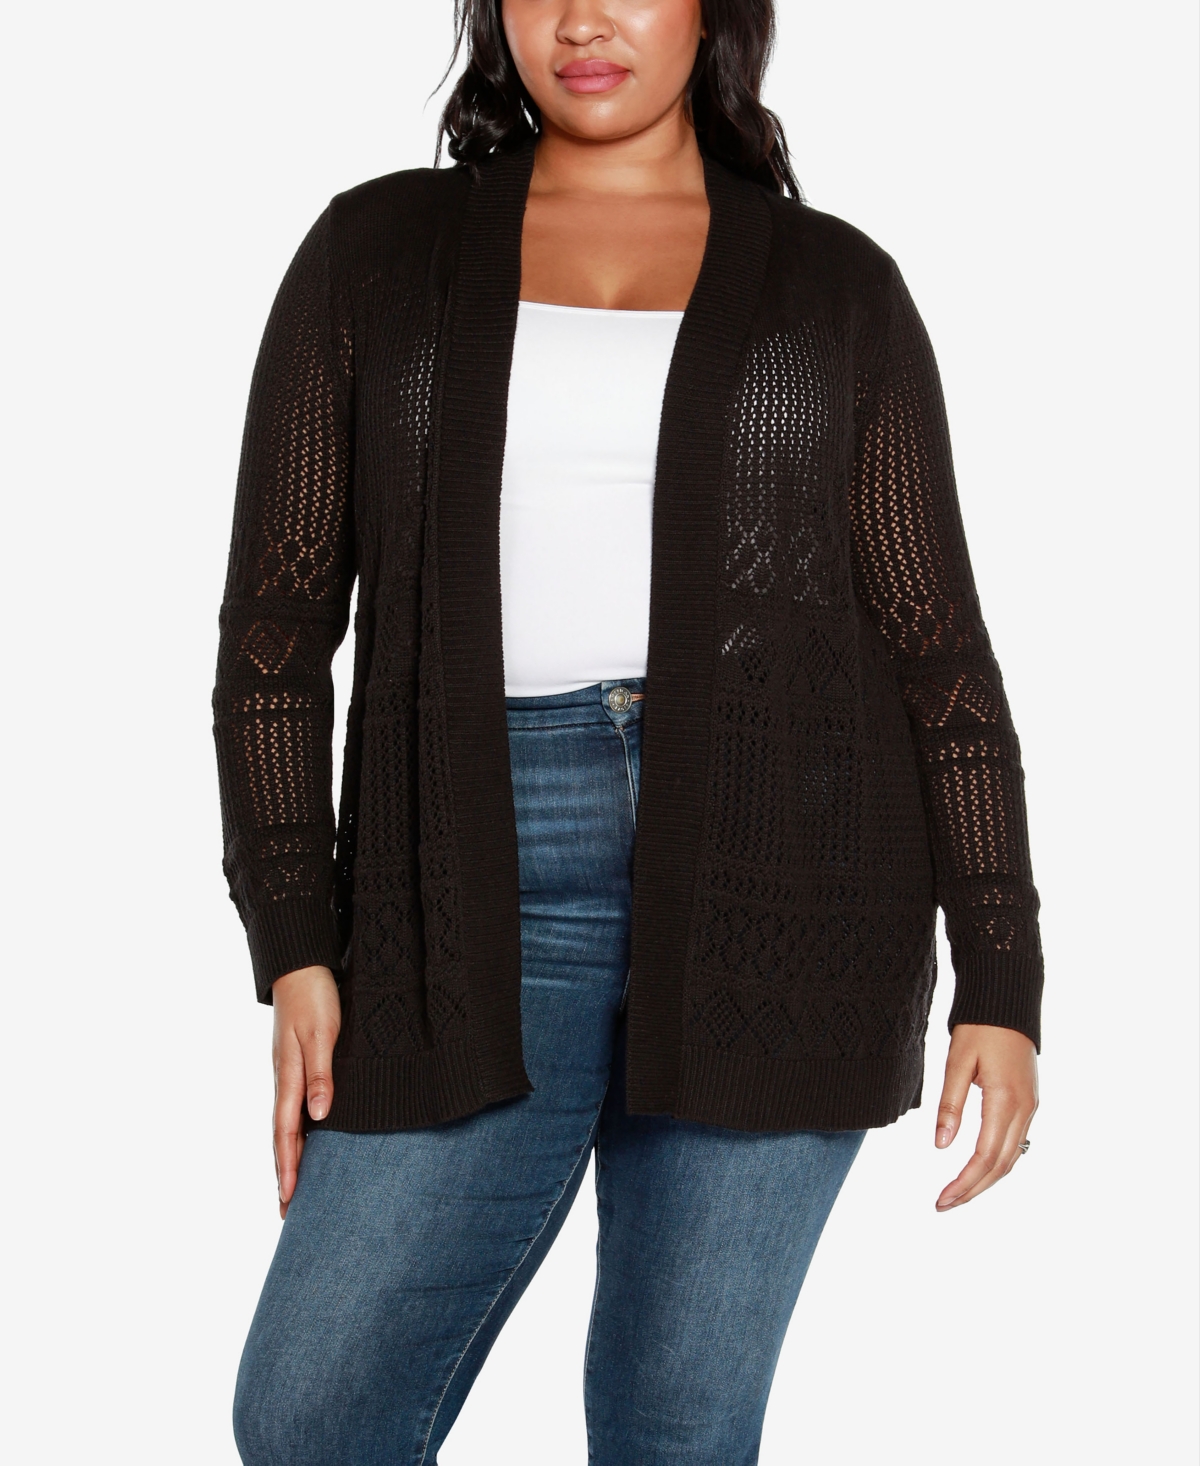 Belldini Plus Size Pointelle Long Sleeves Open Cardigan Sweater In Black